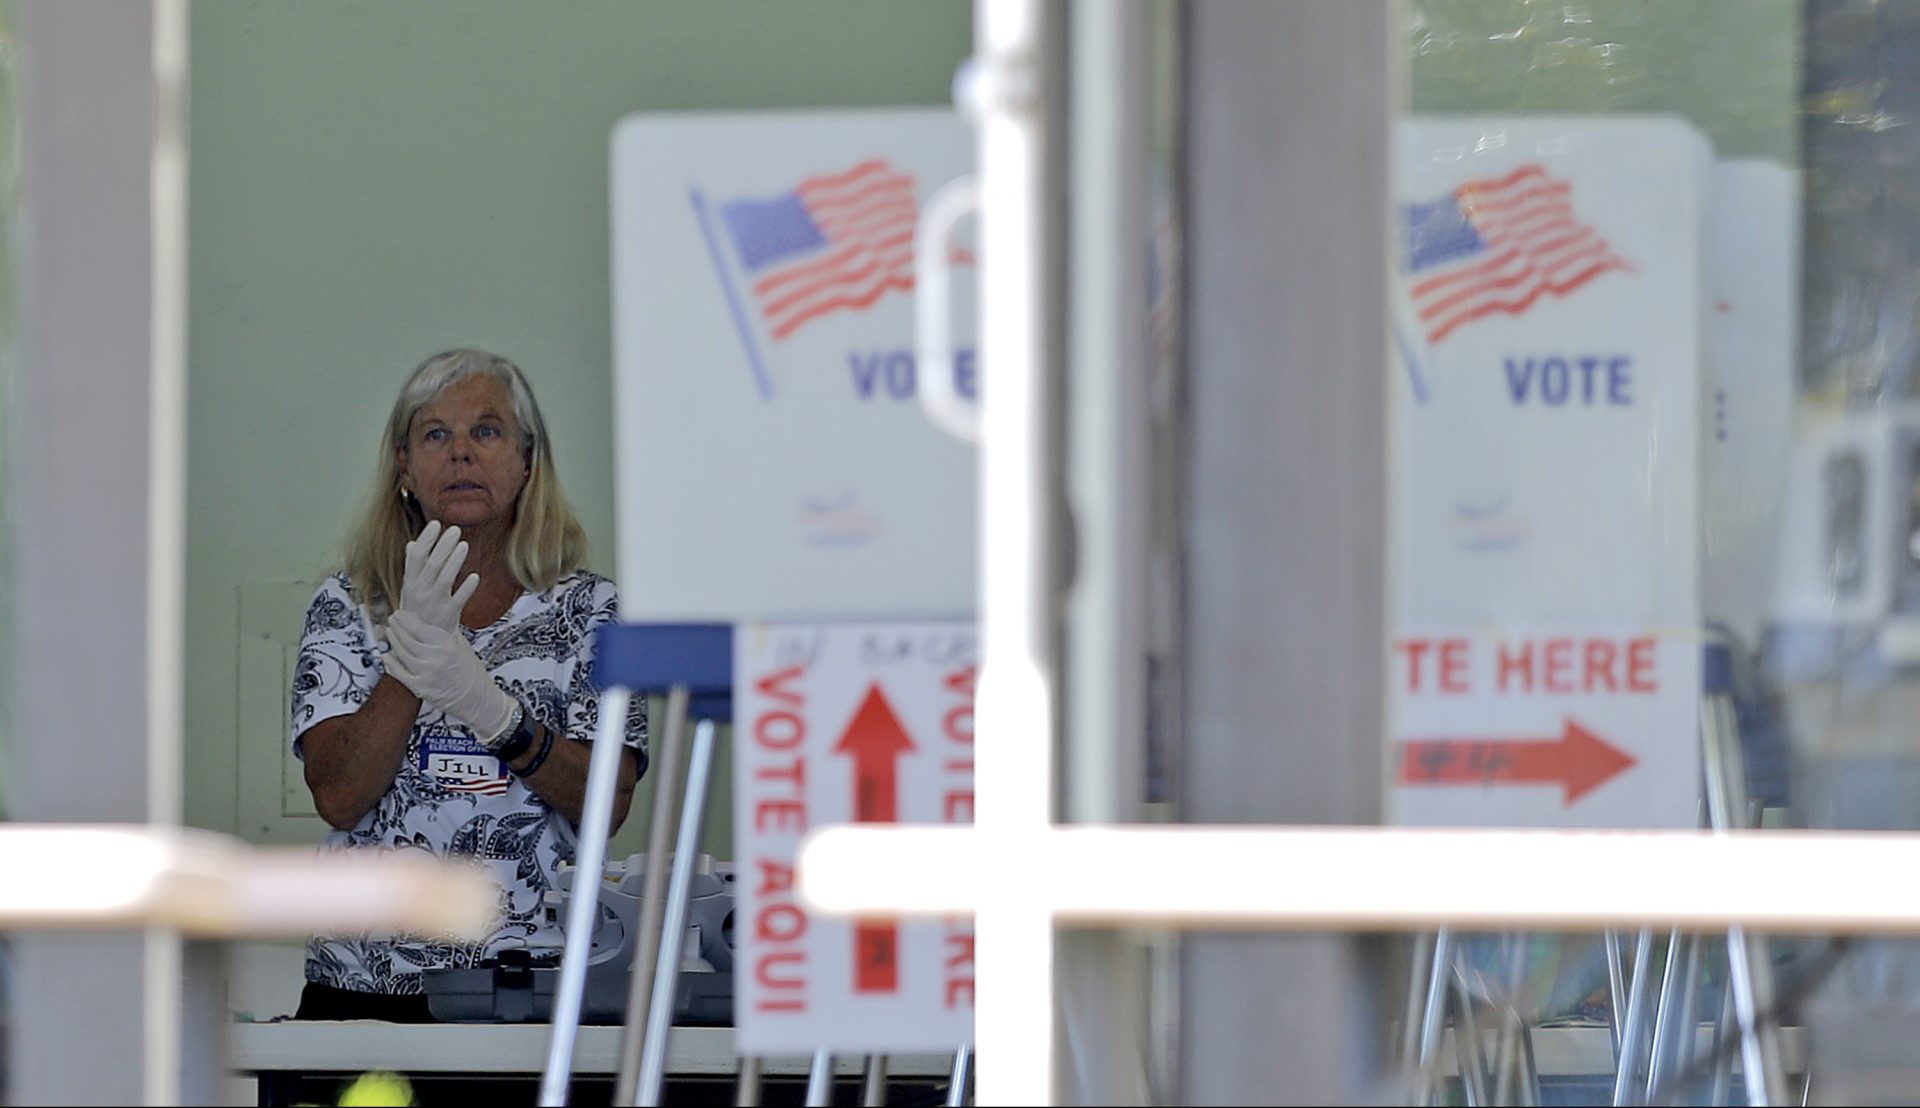 A polling place worker adjusts gloves as she tends to a reception table during the Florida primary election at the First United Methodist Church, Tuesday, March 17, 2020, in Jupiter, Fla. As Florida officials try to contain the spread of the novel coronavirus, the state's voters headed to the polls to cast ballots in the Democratic presidential primary.